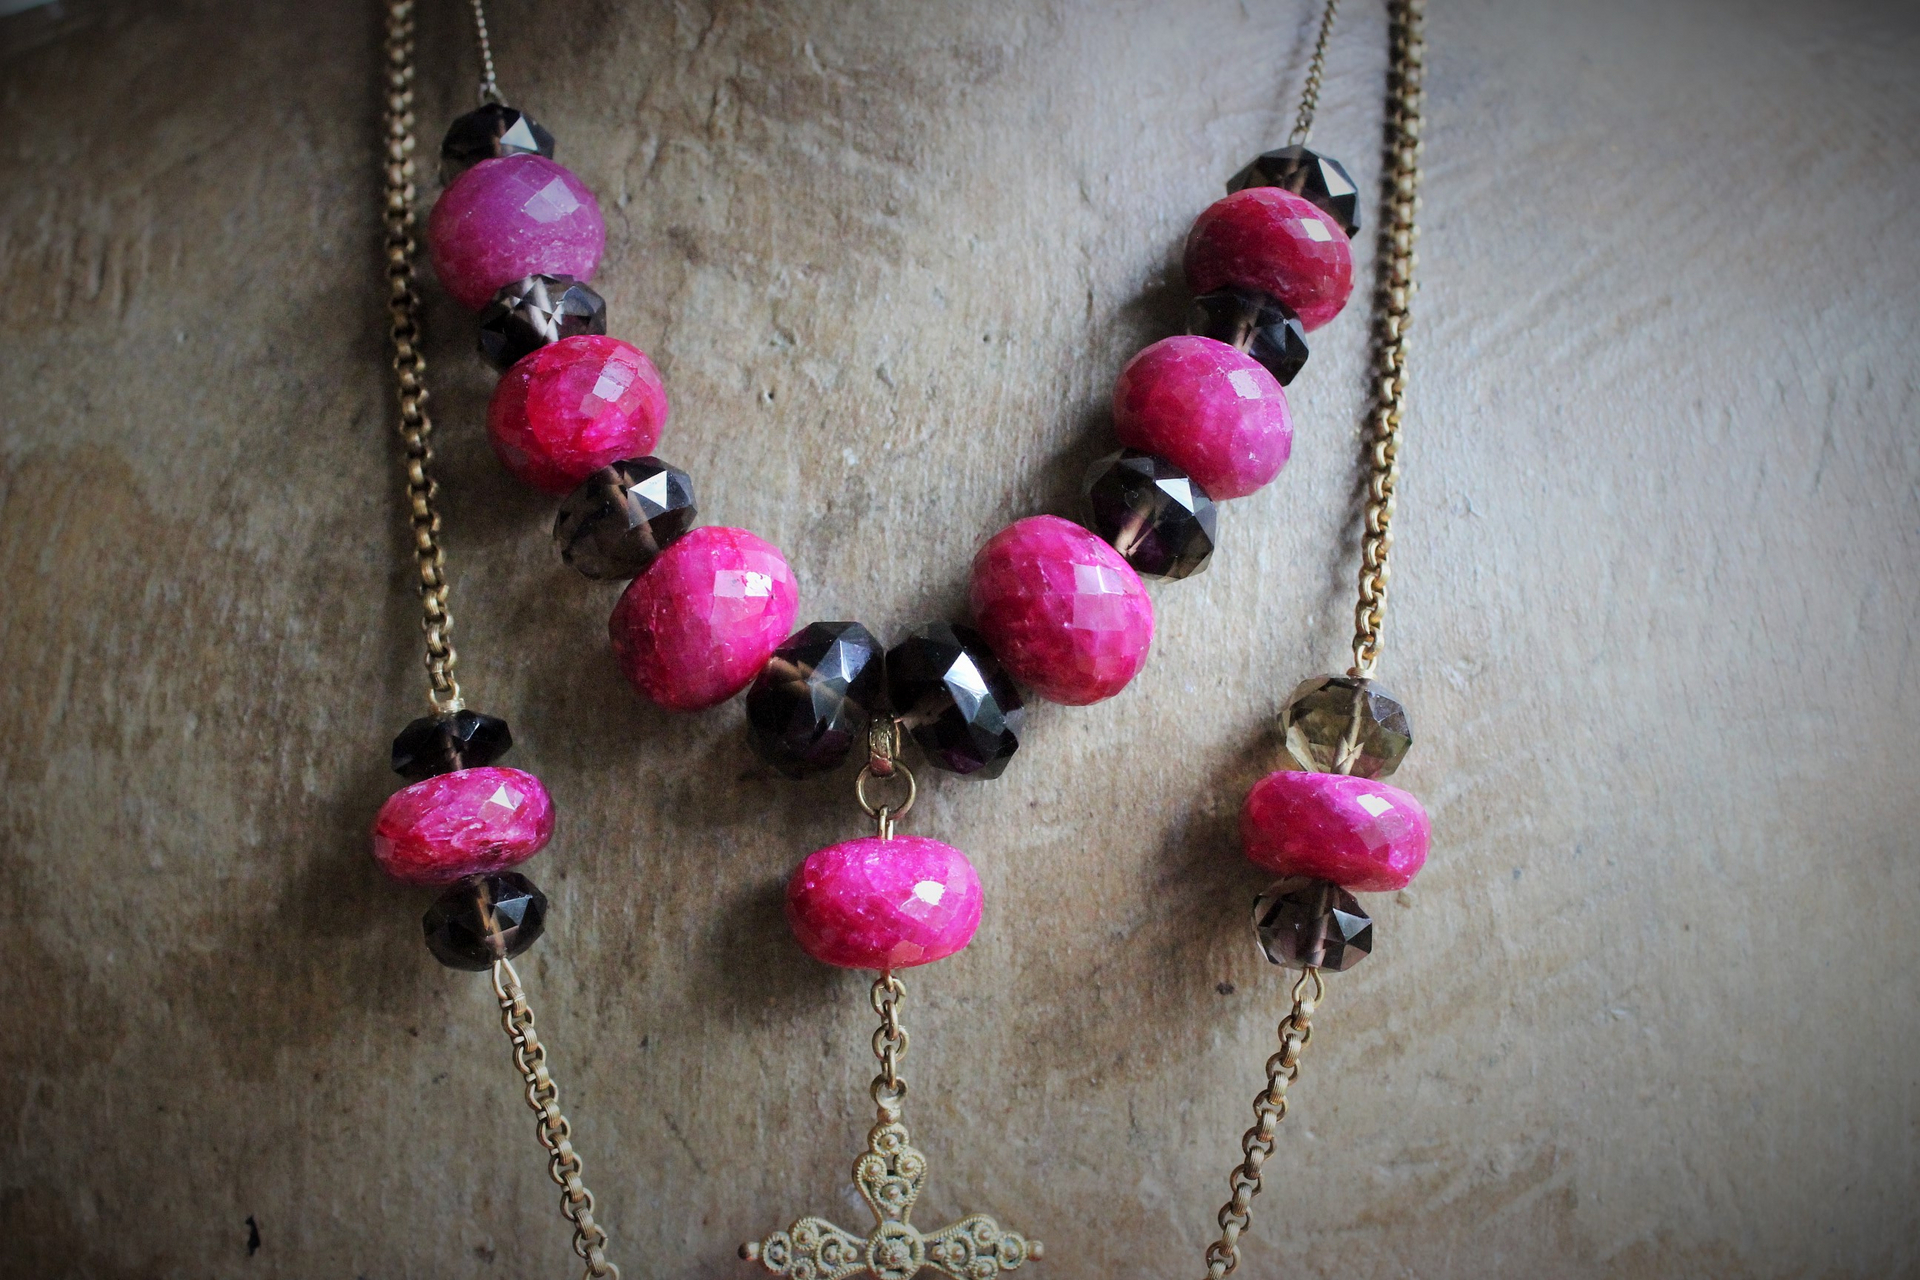 Faceted Natural Ruby & Faceted Smoky Topaz Necklace & Earring Set w/Antique Goldfill Cross, Antique Chain & Chain Tassel